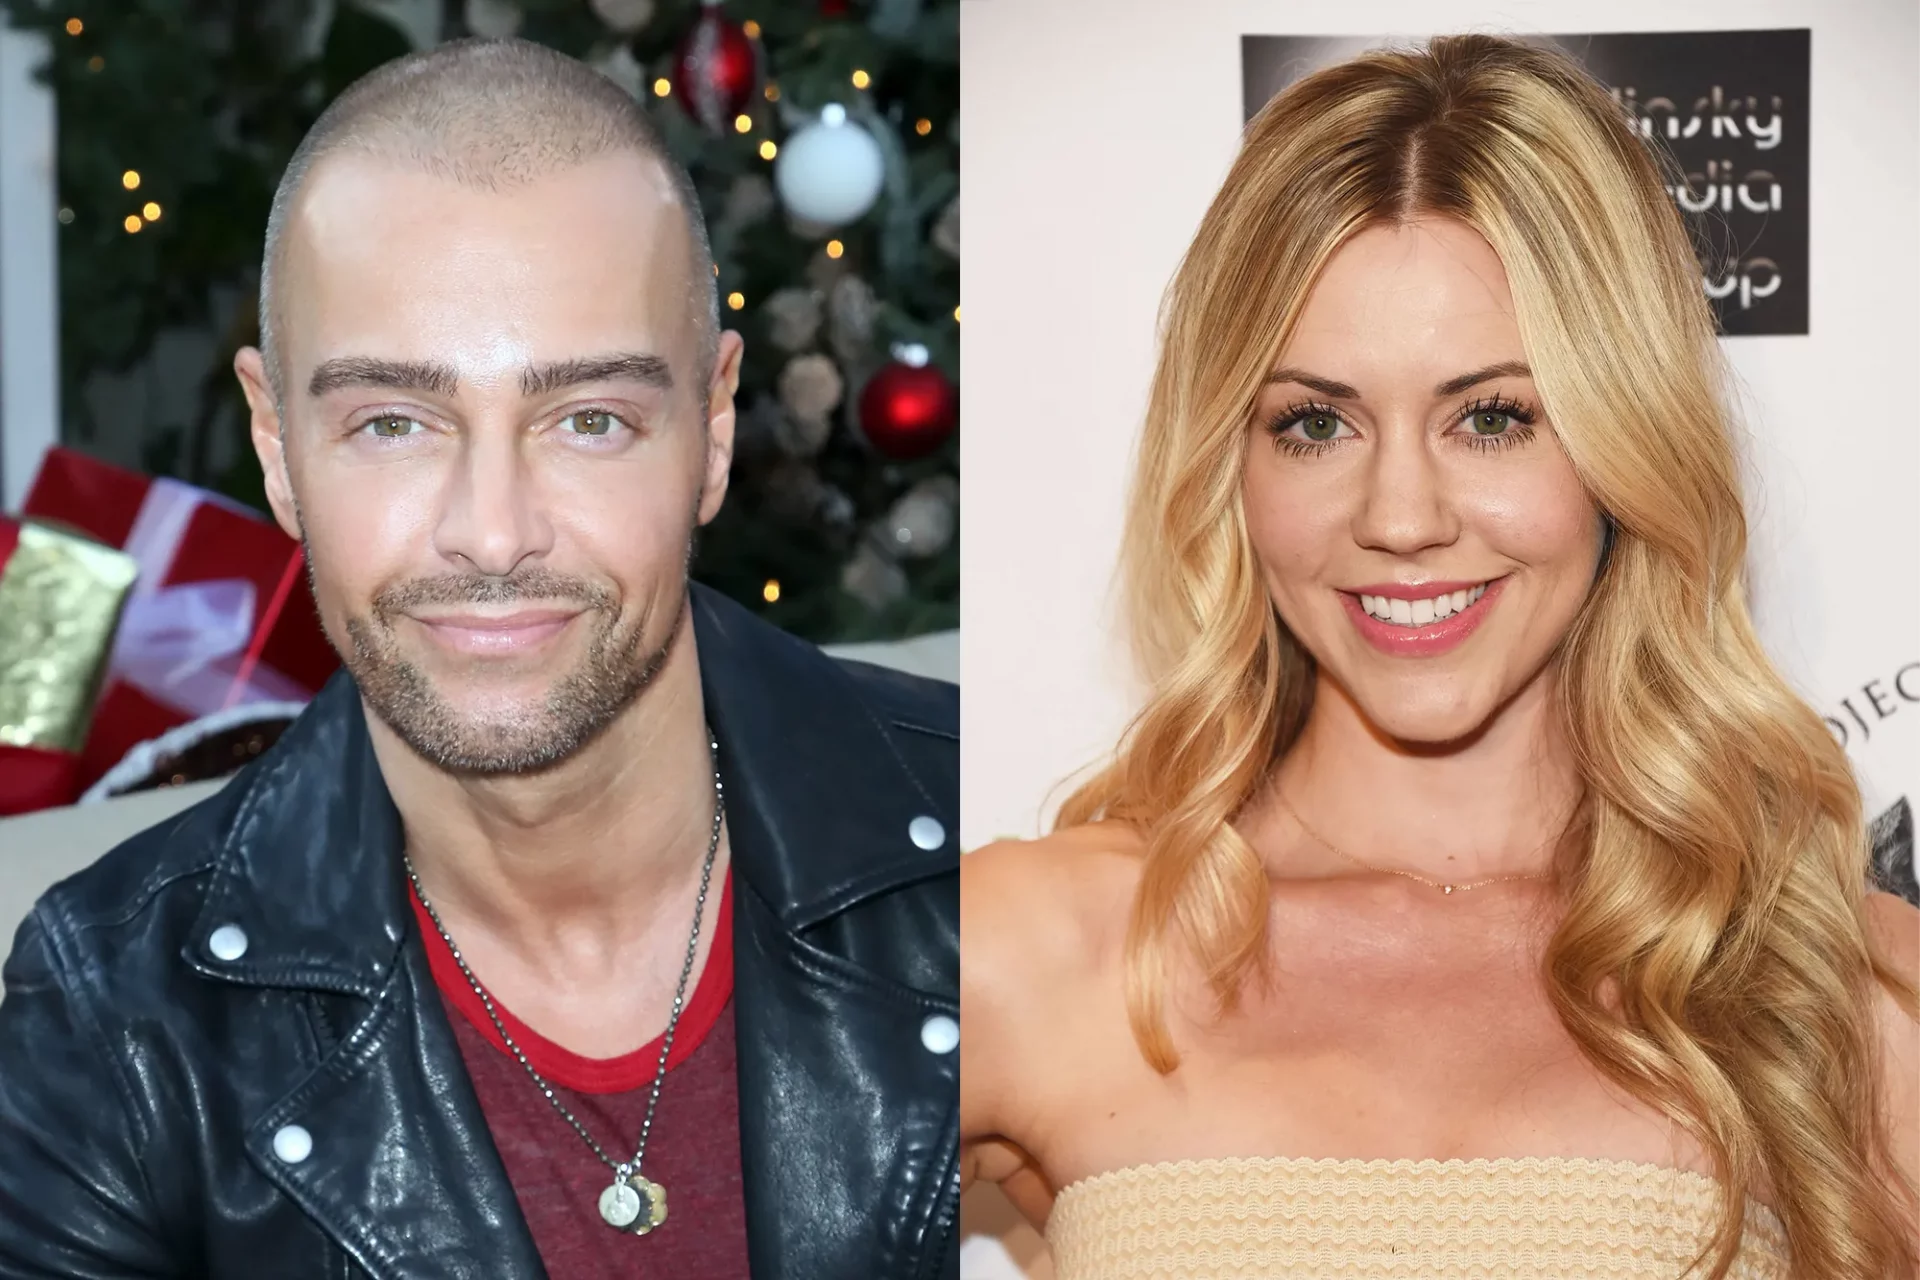 Joey Lawrence &  Samantha Cope Wedding Pictures  Joey Lawrence Marries Actress Samantha Cope, Wedding Pics, Ex-Wife, Age, Instagram &#038; More! joey lawrence samantha cope getty images